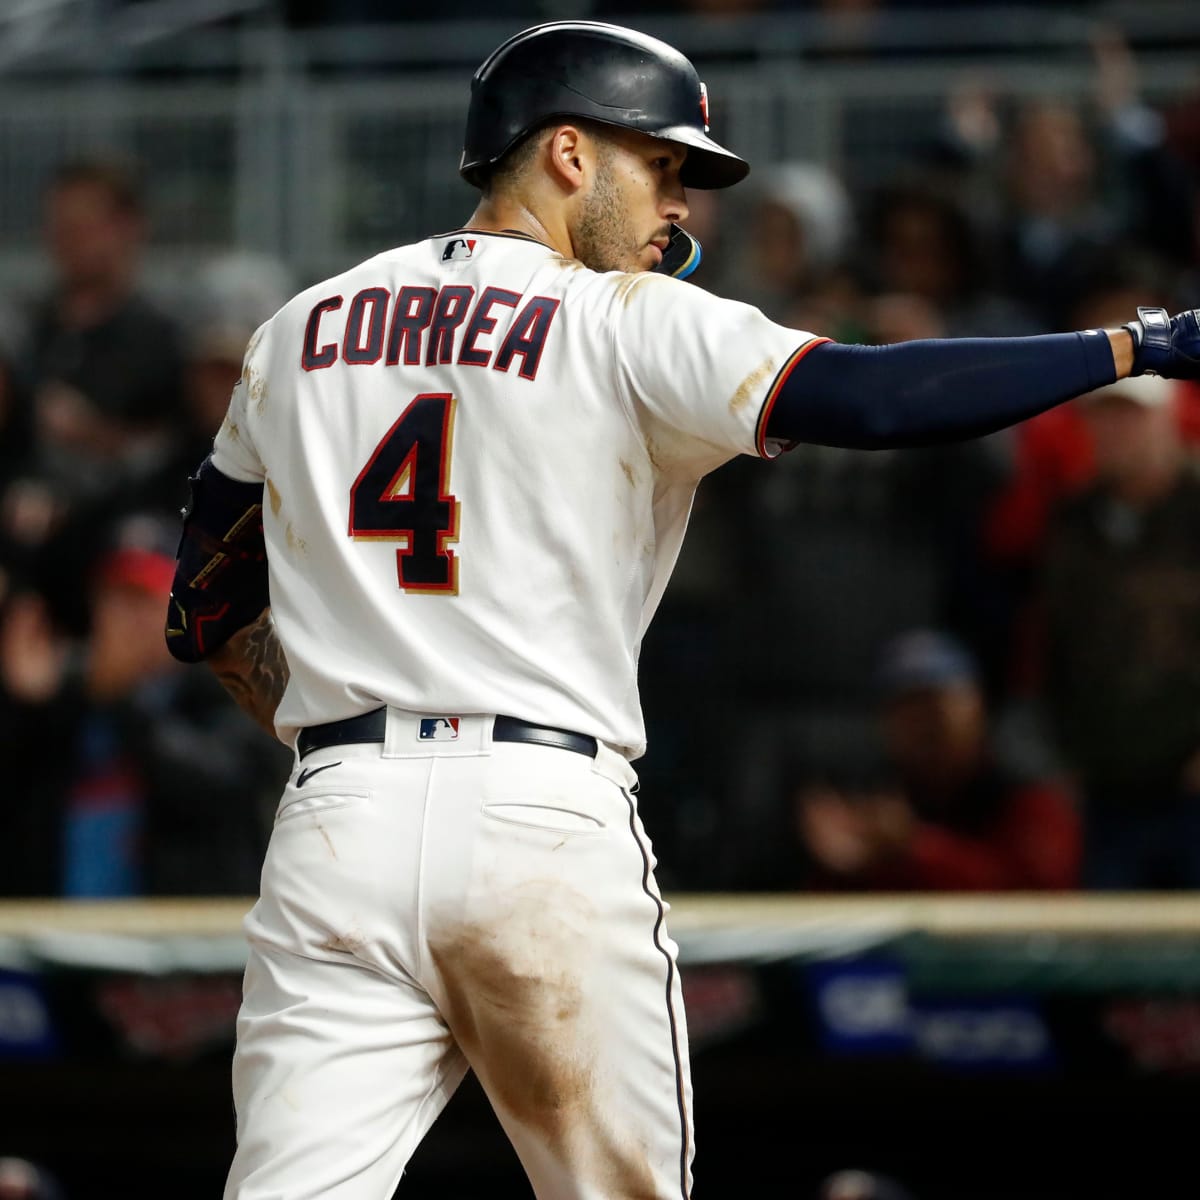 The Correa Saga: Have the Twins Gone From Also-Rans to Contenders